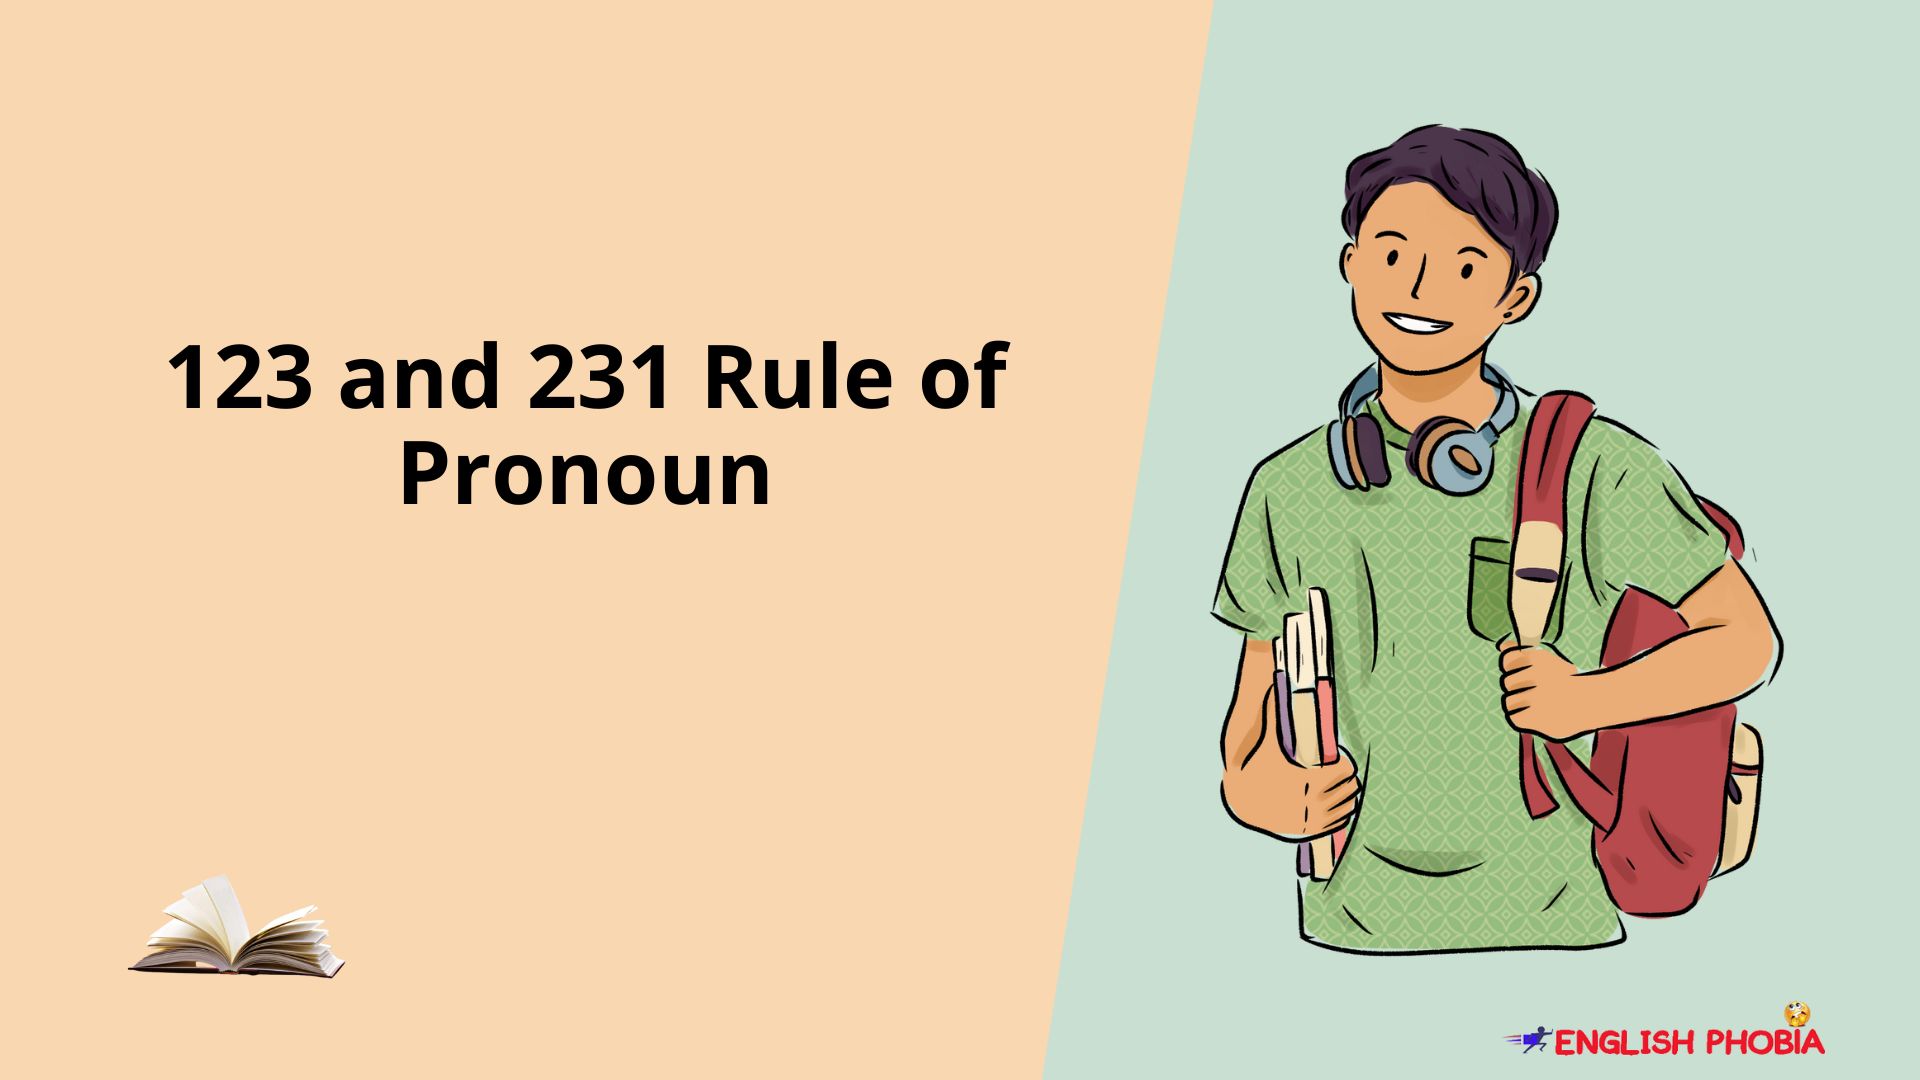 123 and 231 Rule of Pronoun